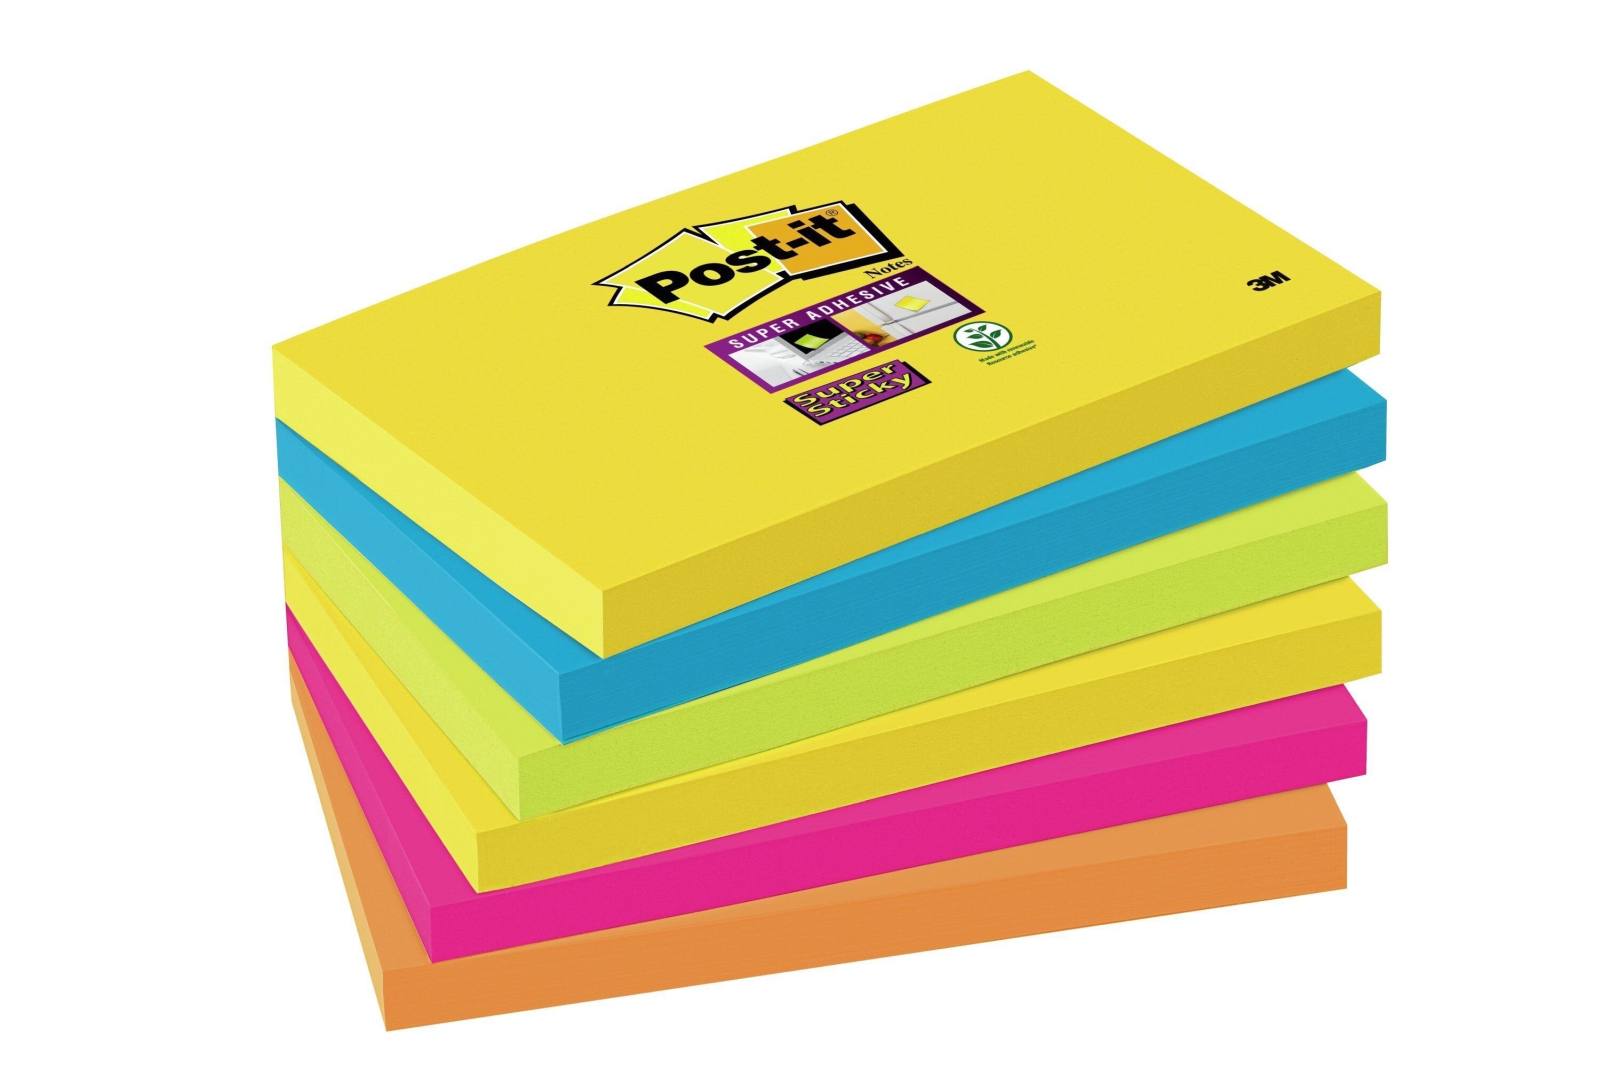 3M Post-it Super Sticky Notes 6556SR, 76 mm x 127 mm, neon green, neon orange, ultra blue, ultra yellow, ultra pink, 6 pads of 90 sheets each